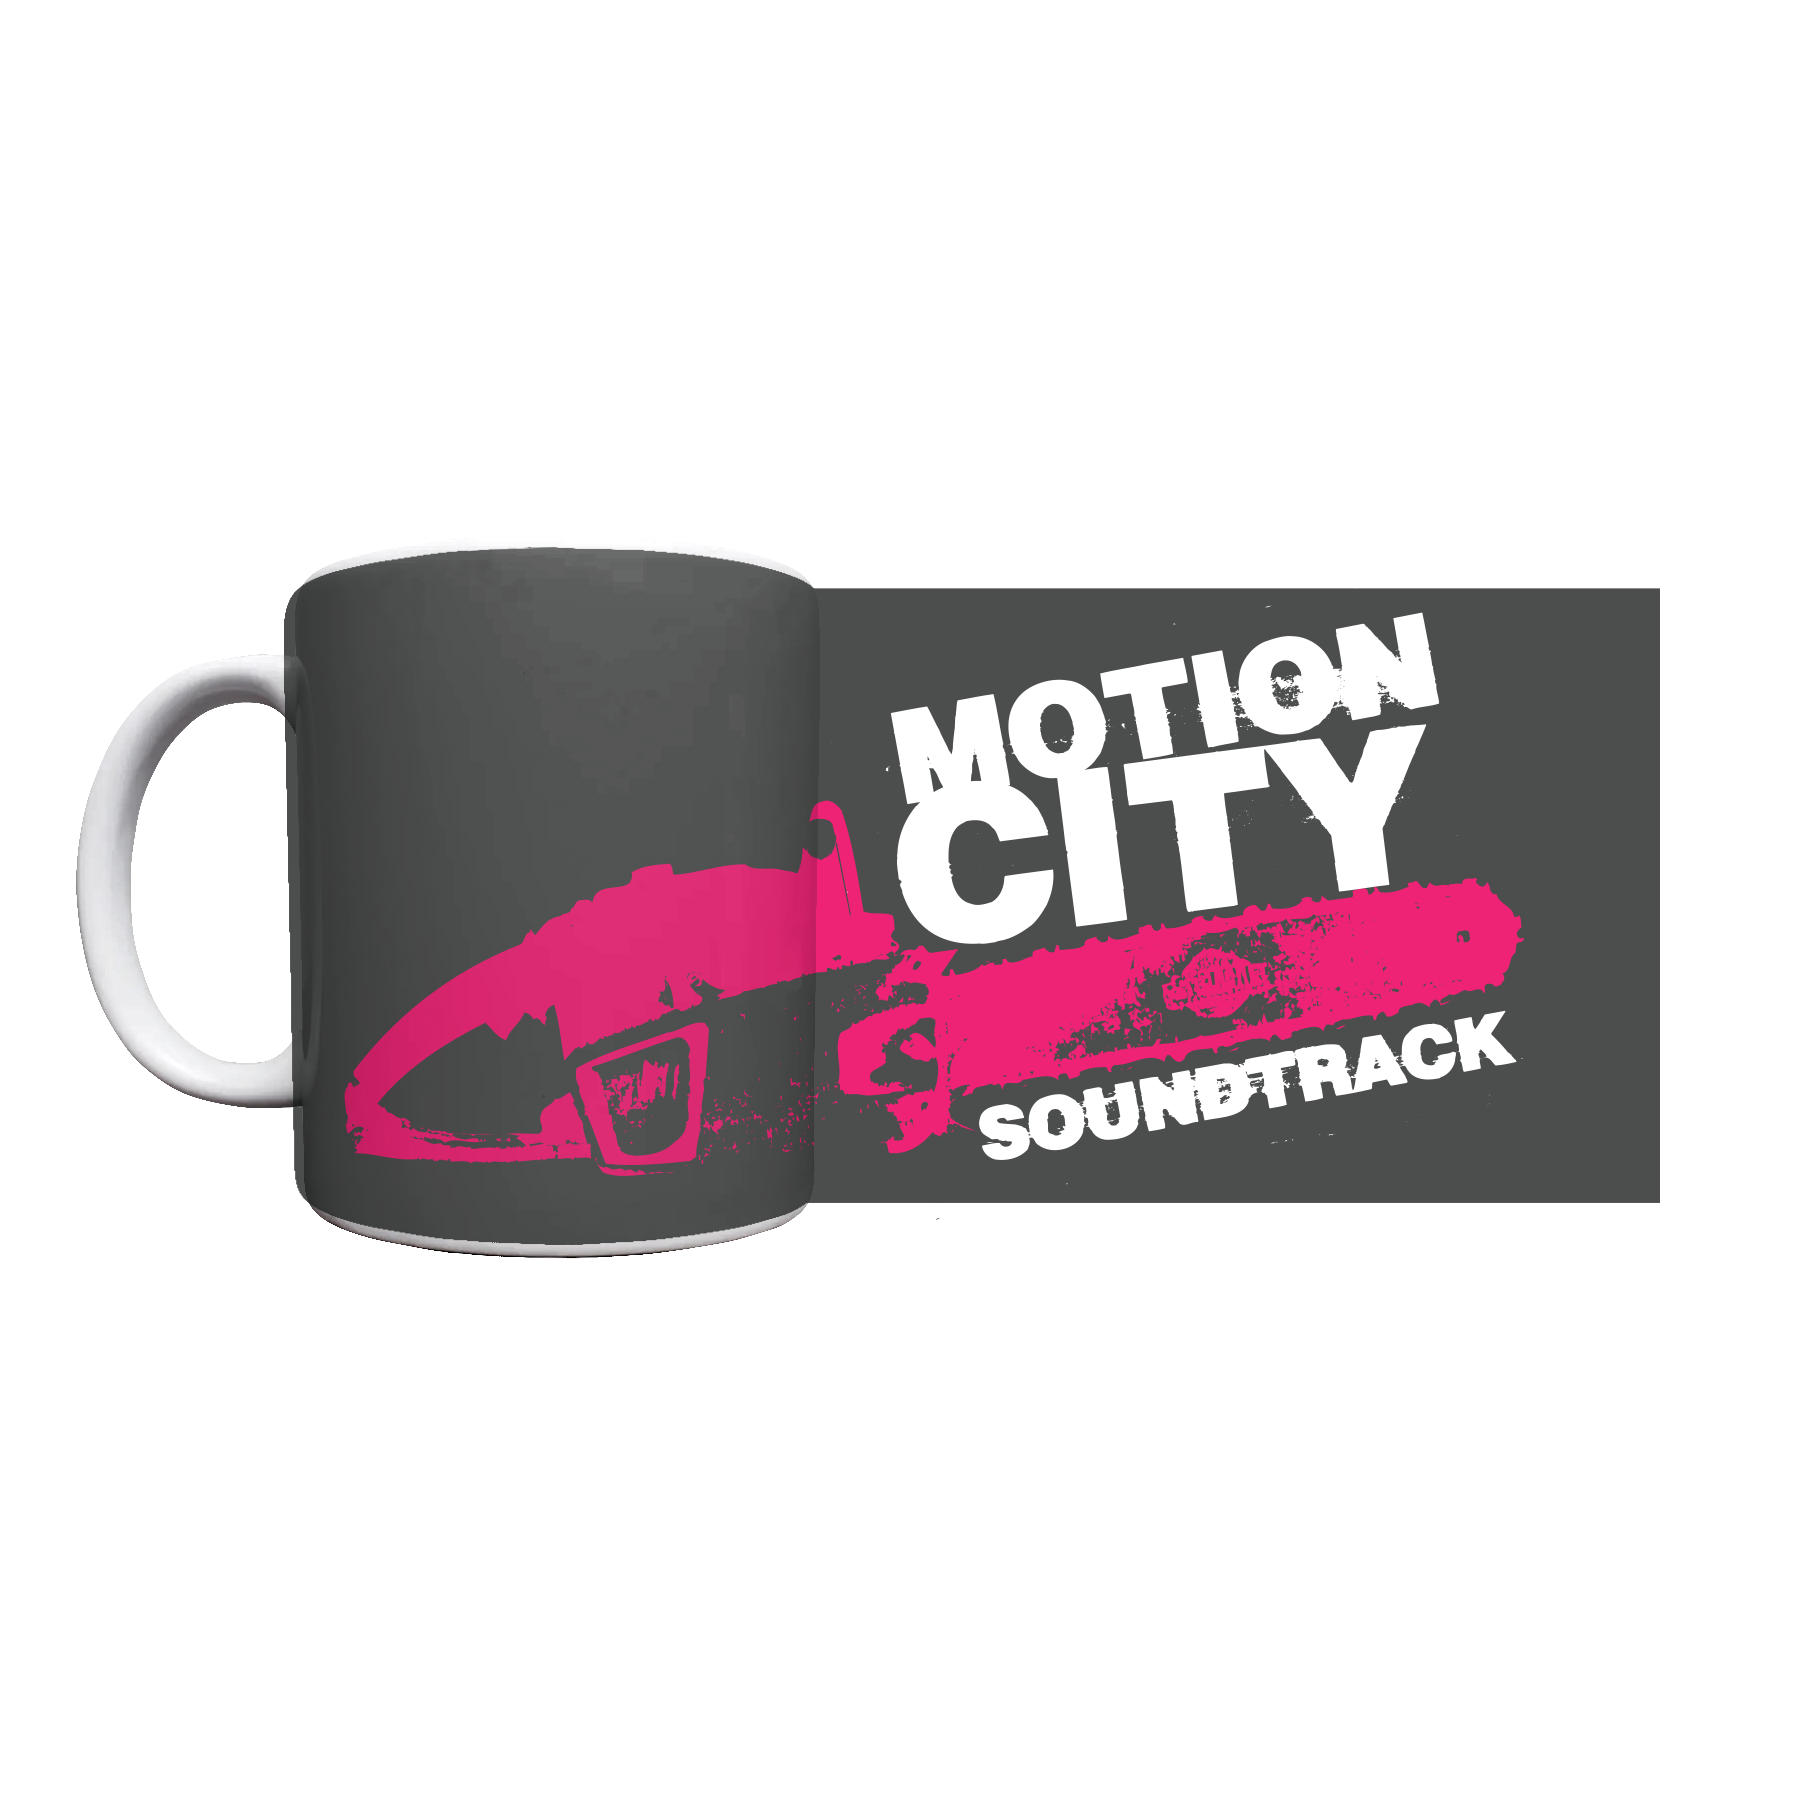 White mug with black background, MOTION CITY SOUNDTRACK in bold white lettering, pink chainsaw graphic.